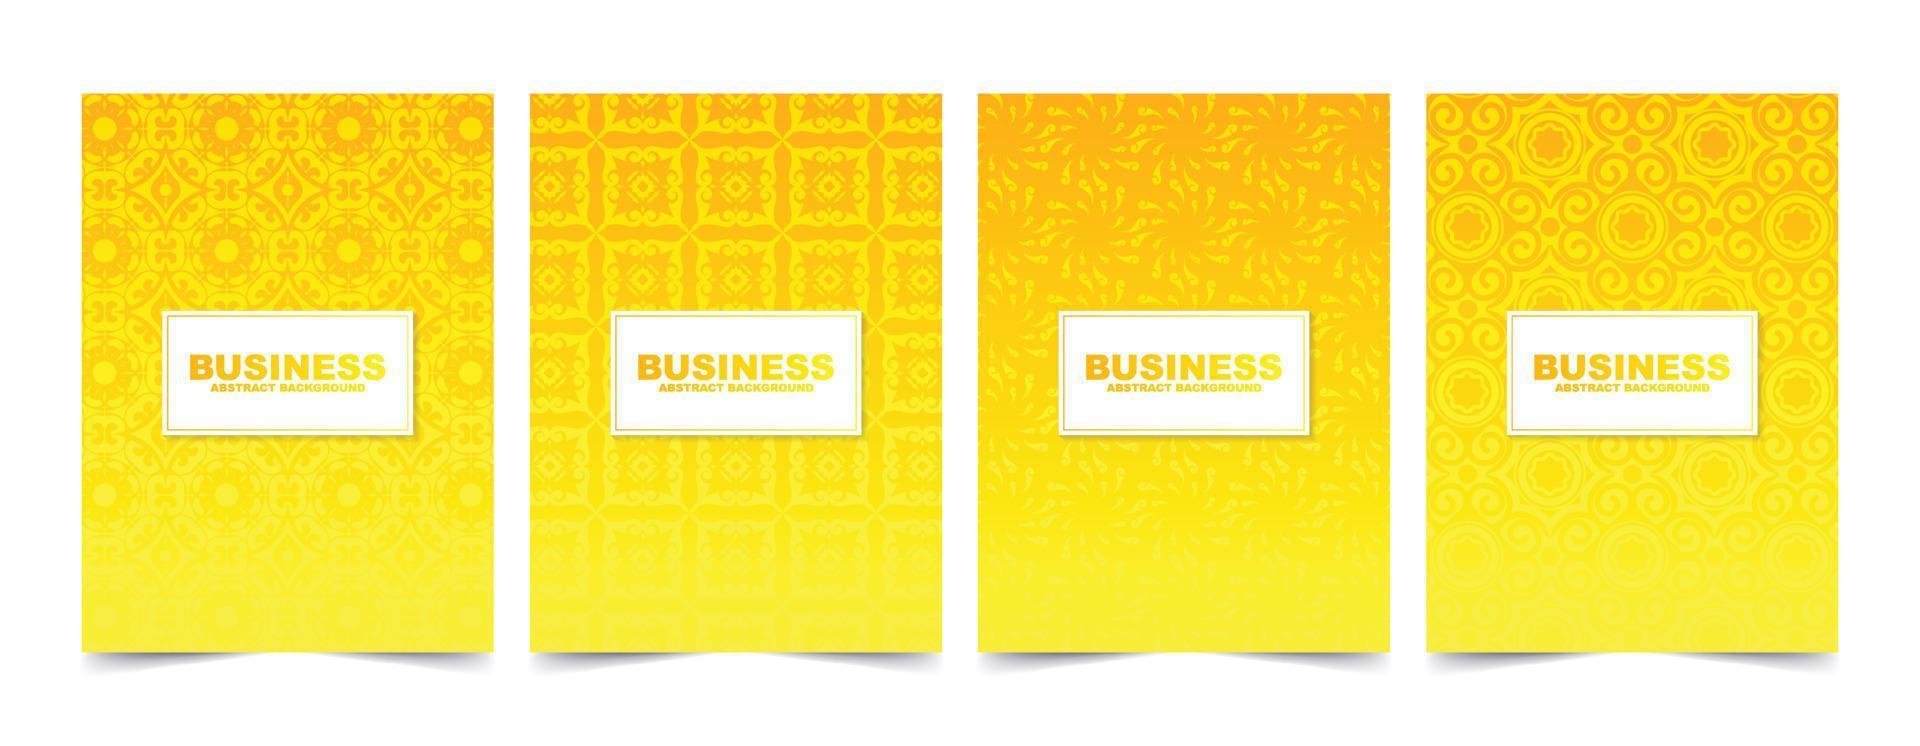 yellow abstract pattern cover design vector